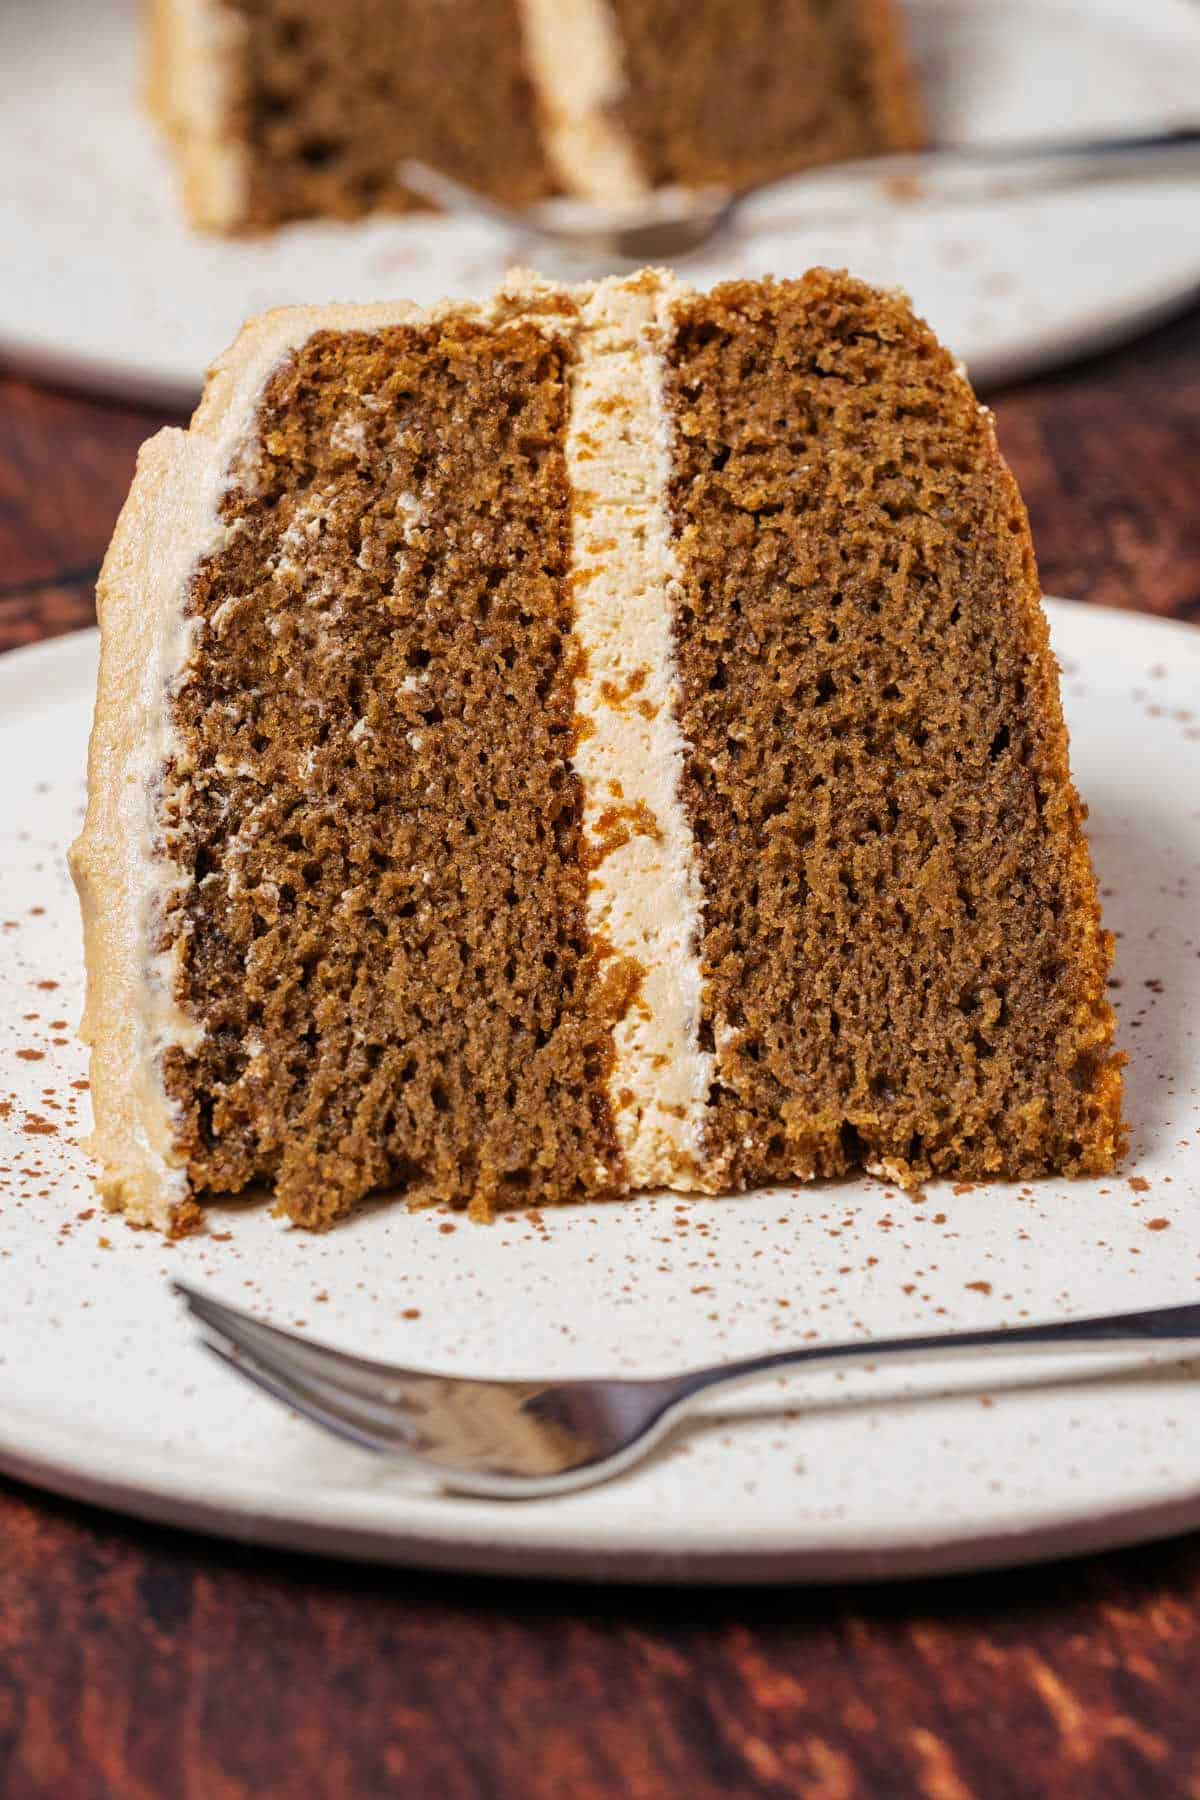 Slice of coffee cake on a white plate with a cake fork.